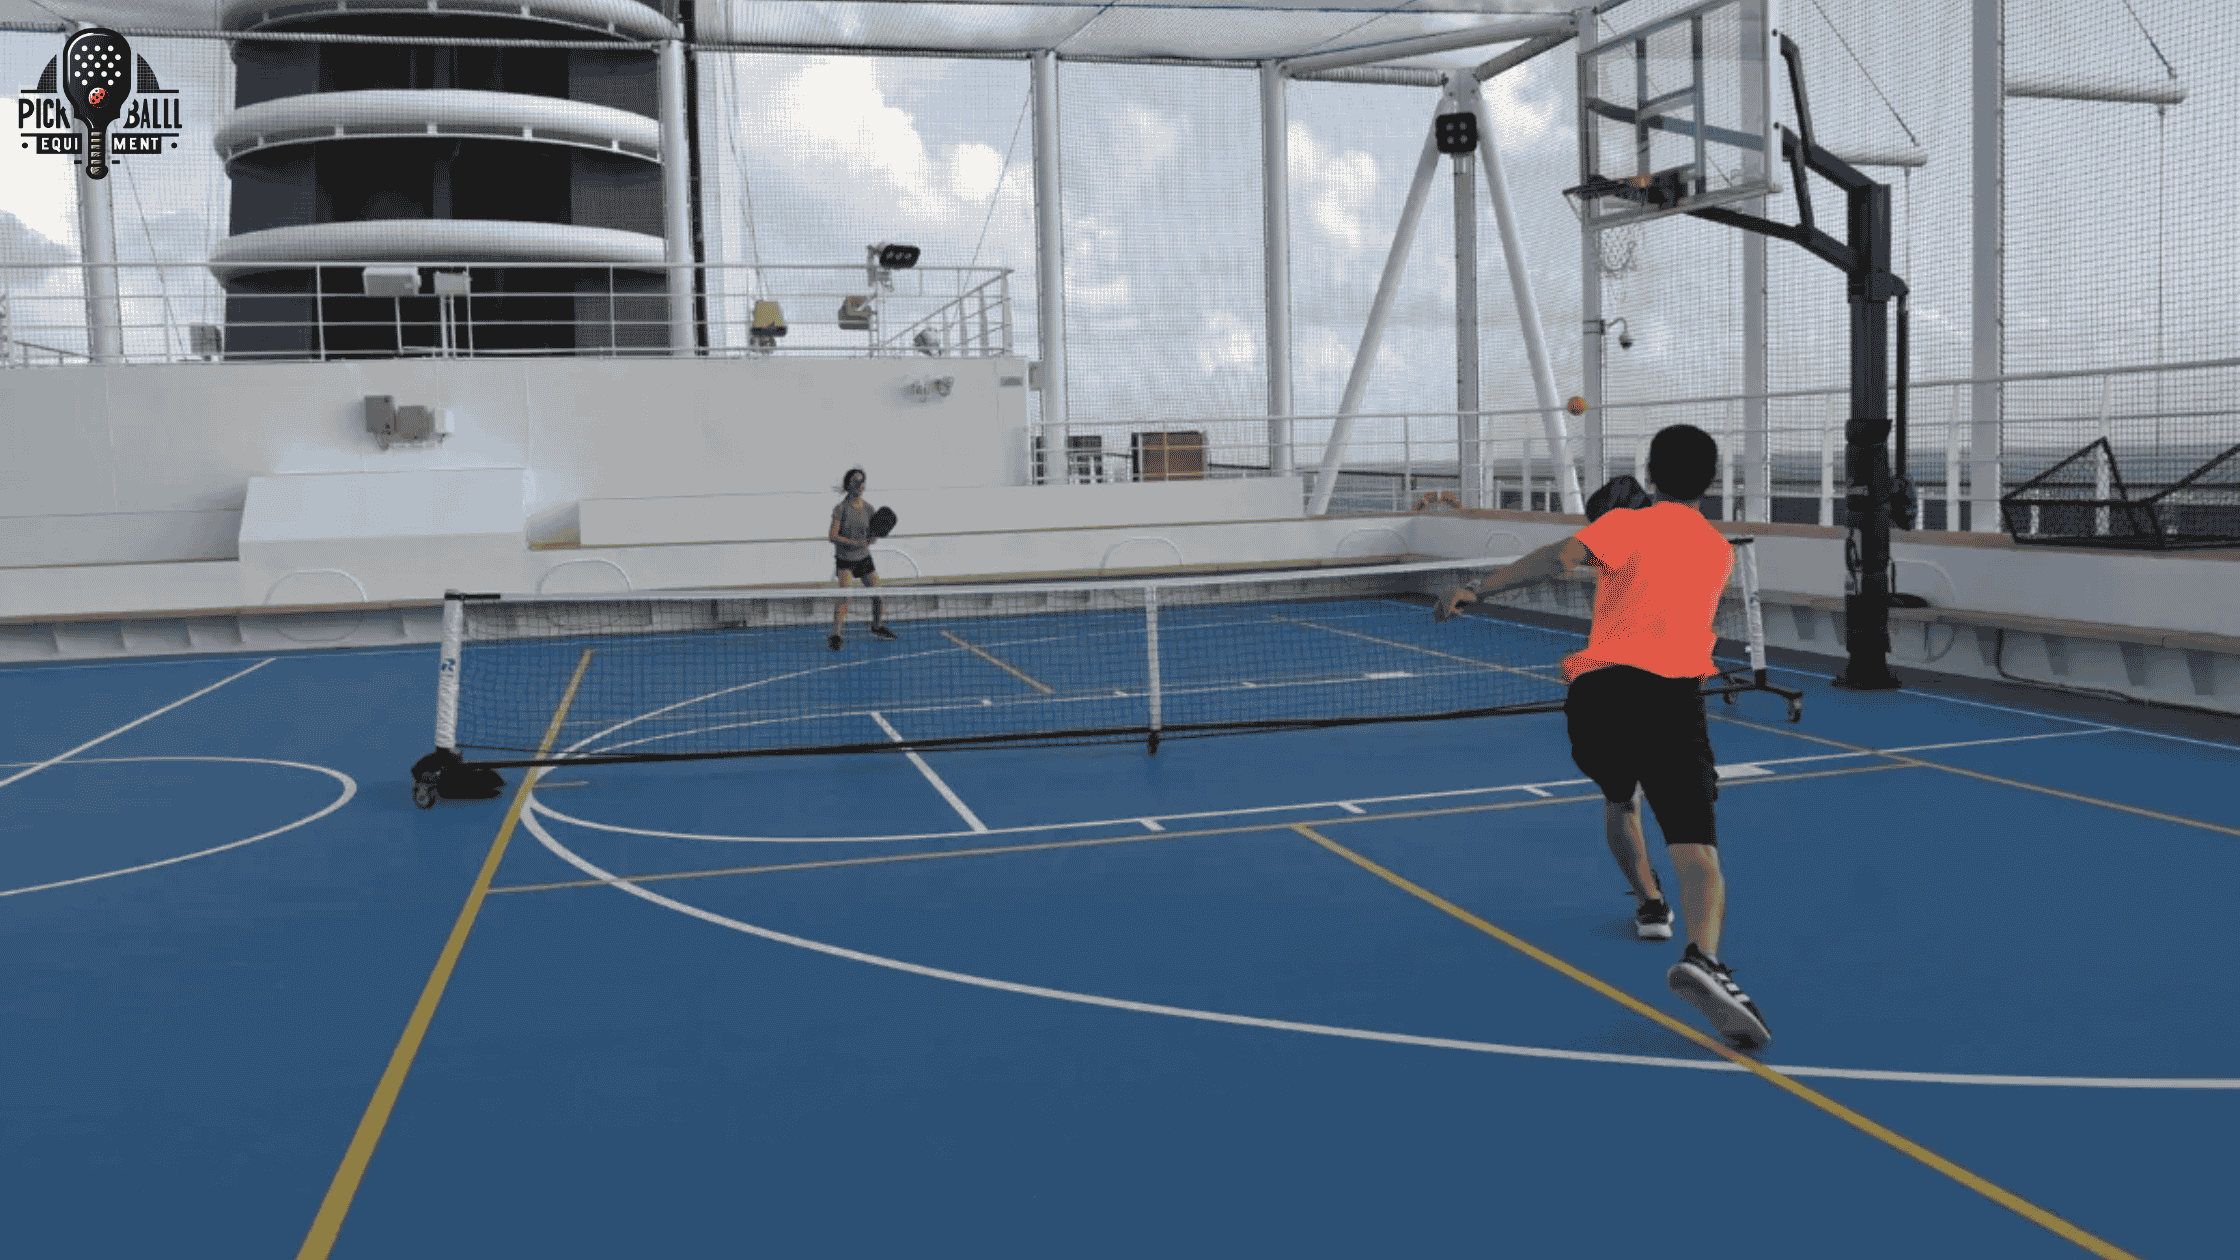 Resorts and Cruises Featuring Pickleball